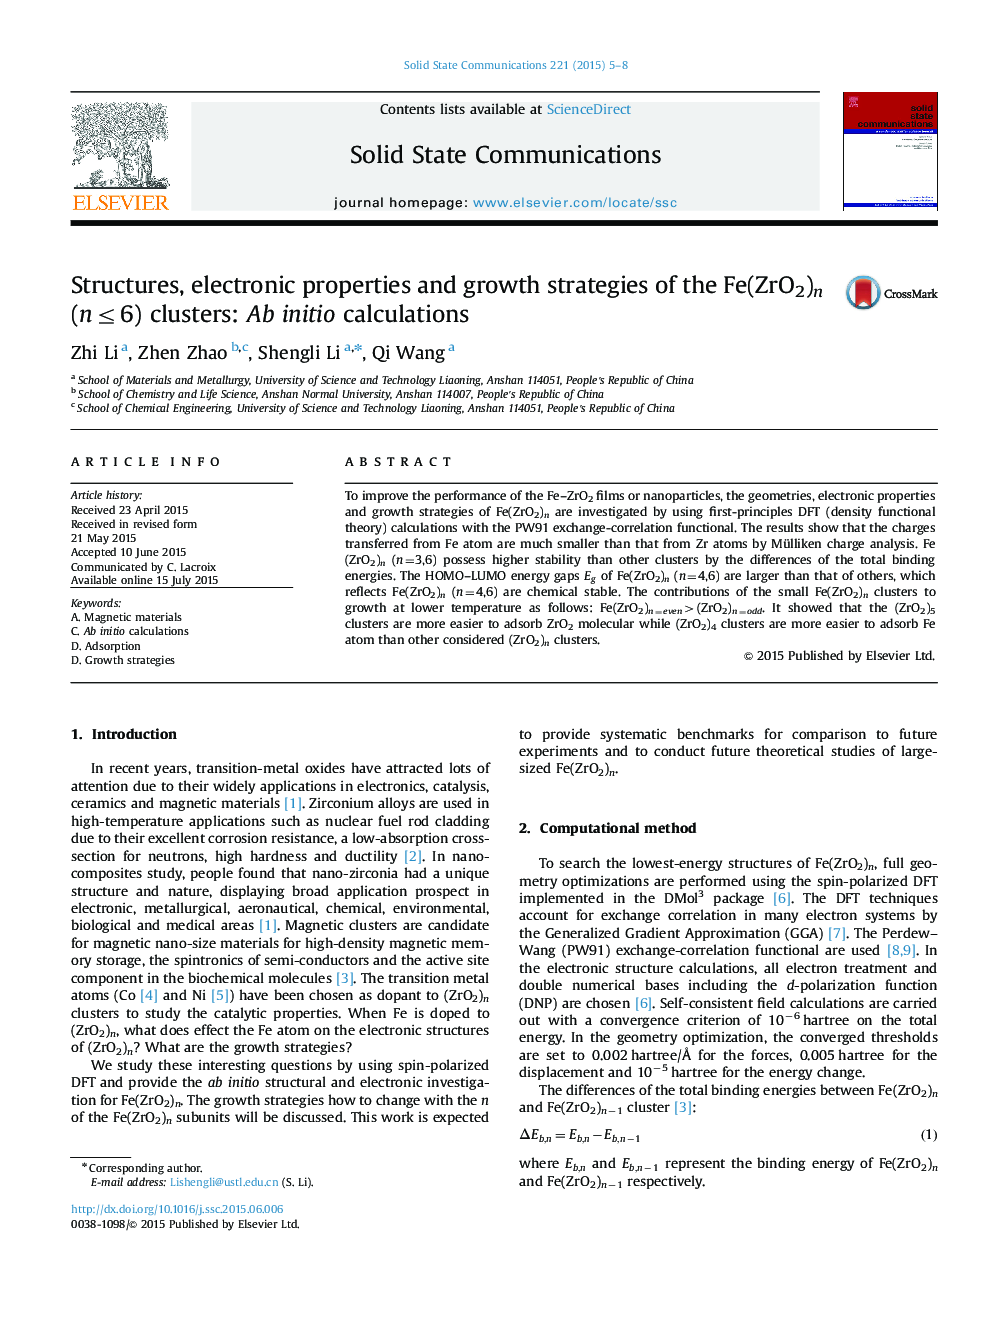 Structures, electronic properties and growth strategies of the Fe(ZrO2)n (n≤6) clusters: Ab initio calculations